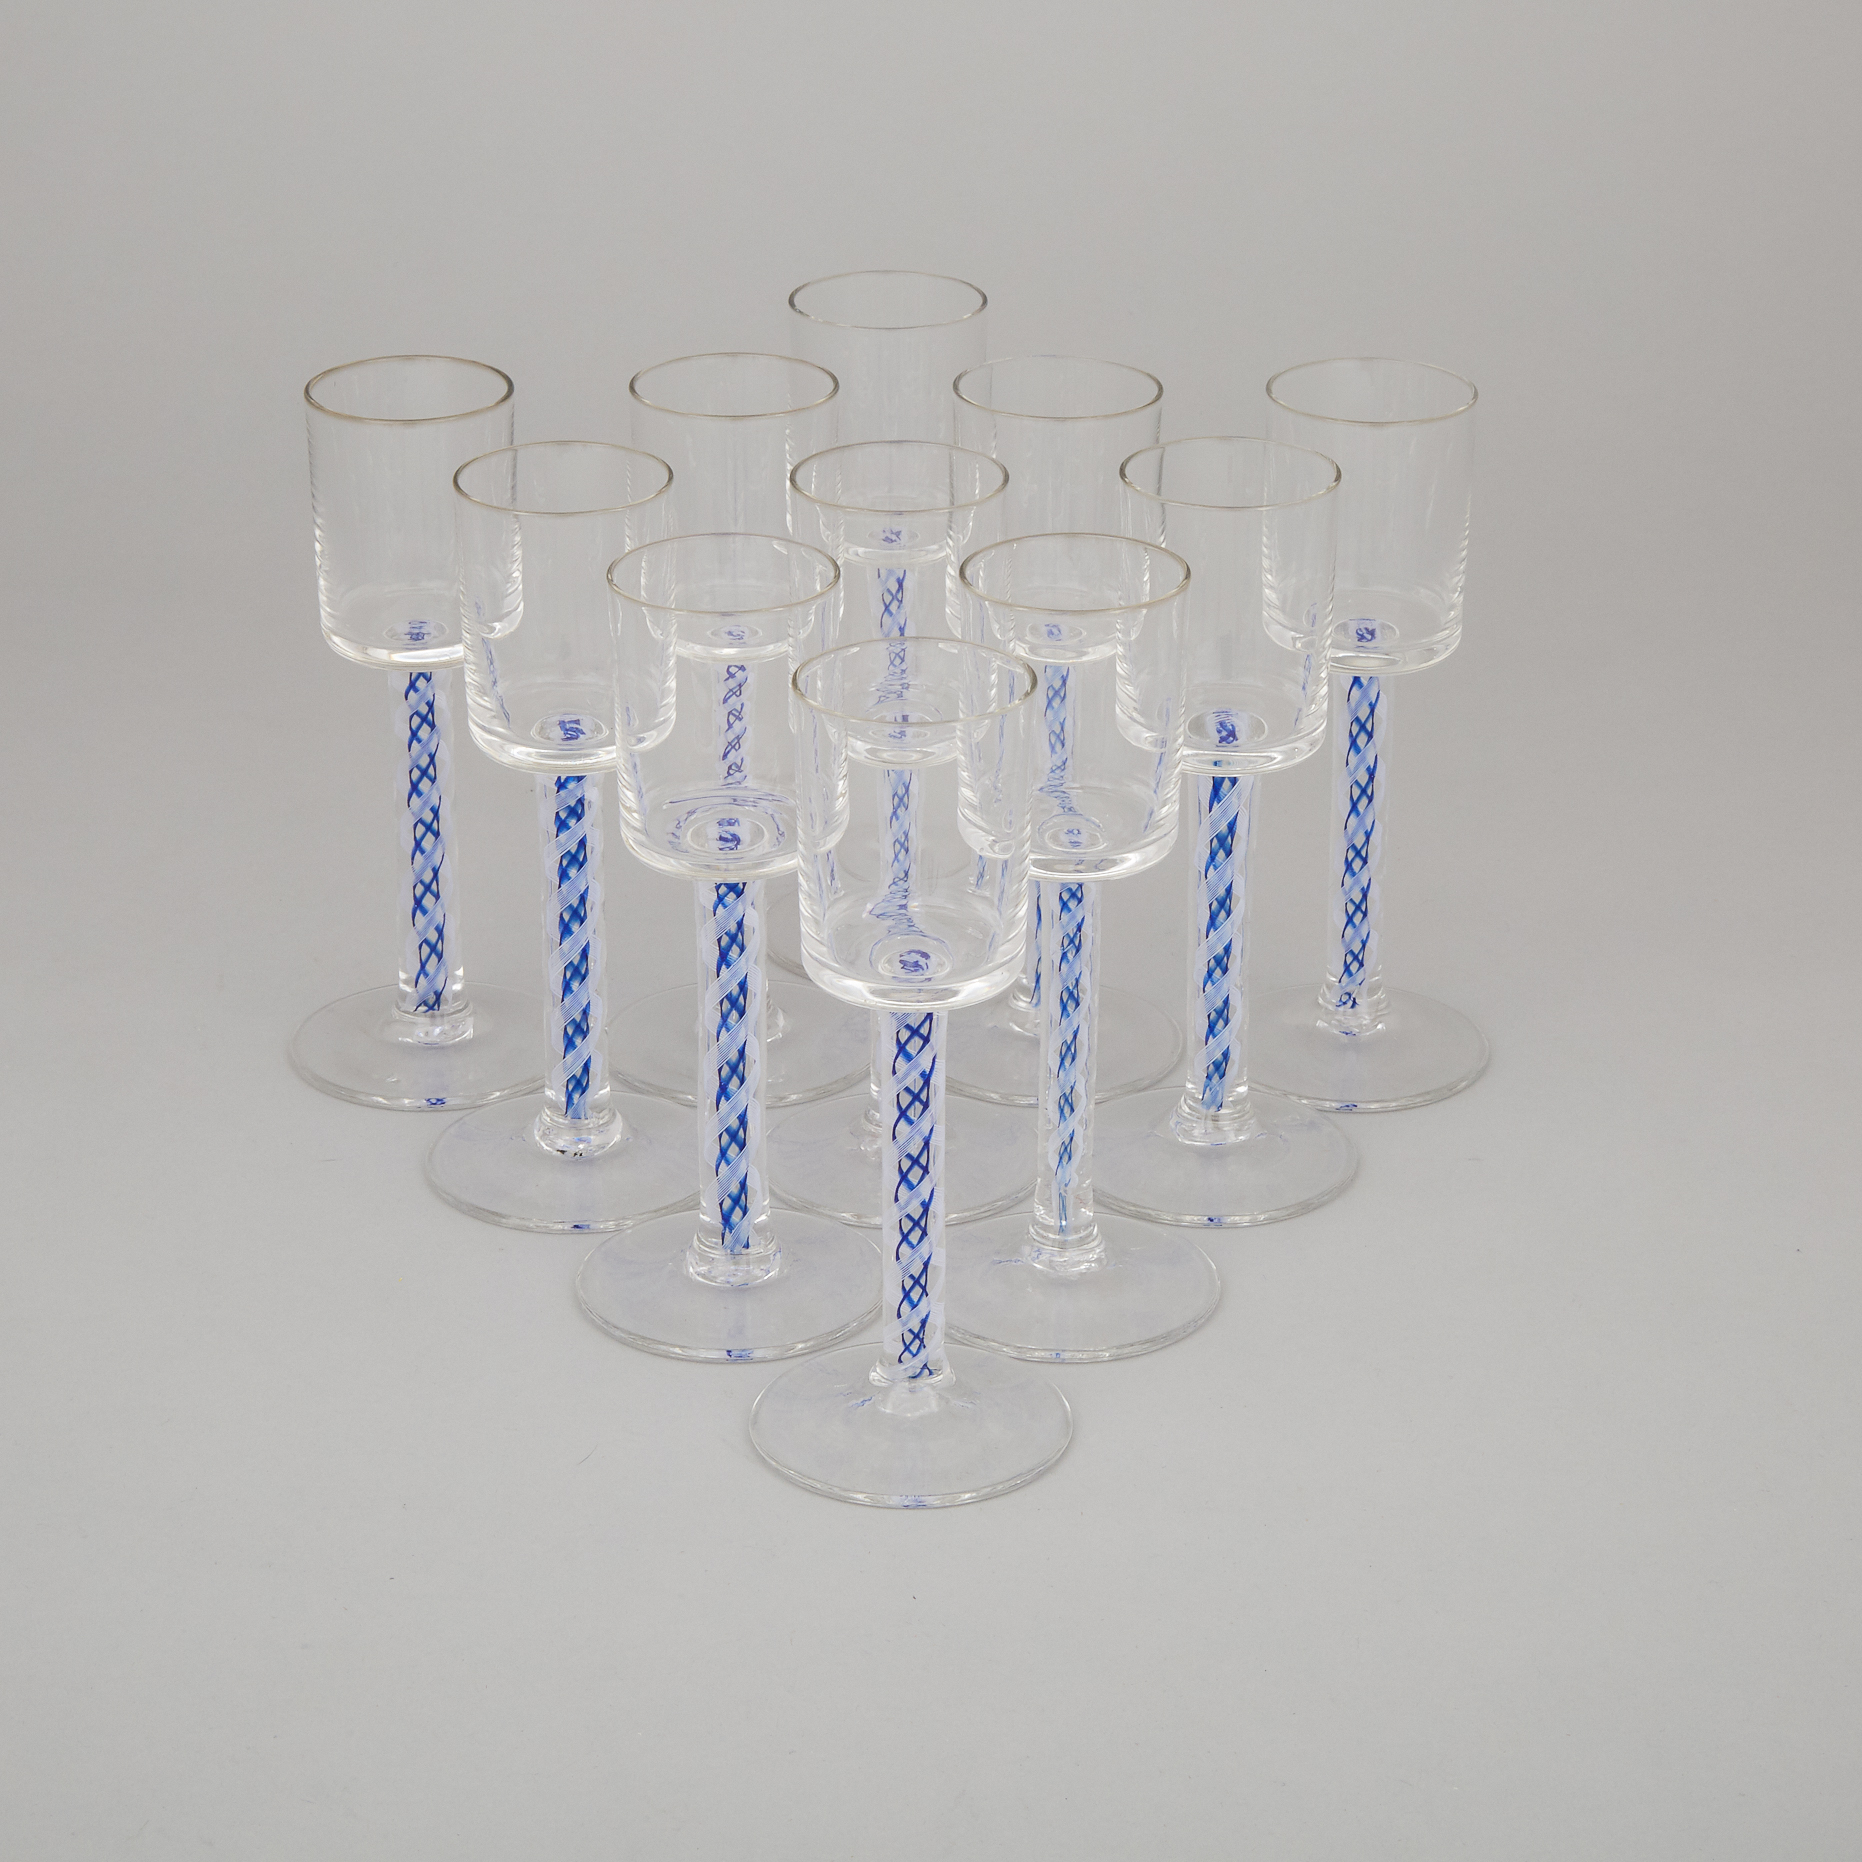 Set of Eleven Continental Blue and Opaque White Colour Twist Stemmed Wine Glasses, 20th century